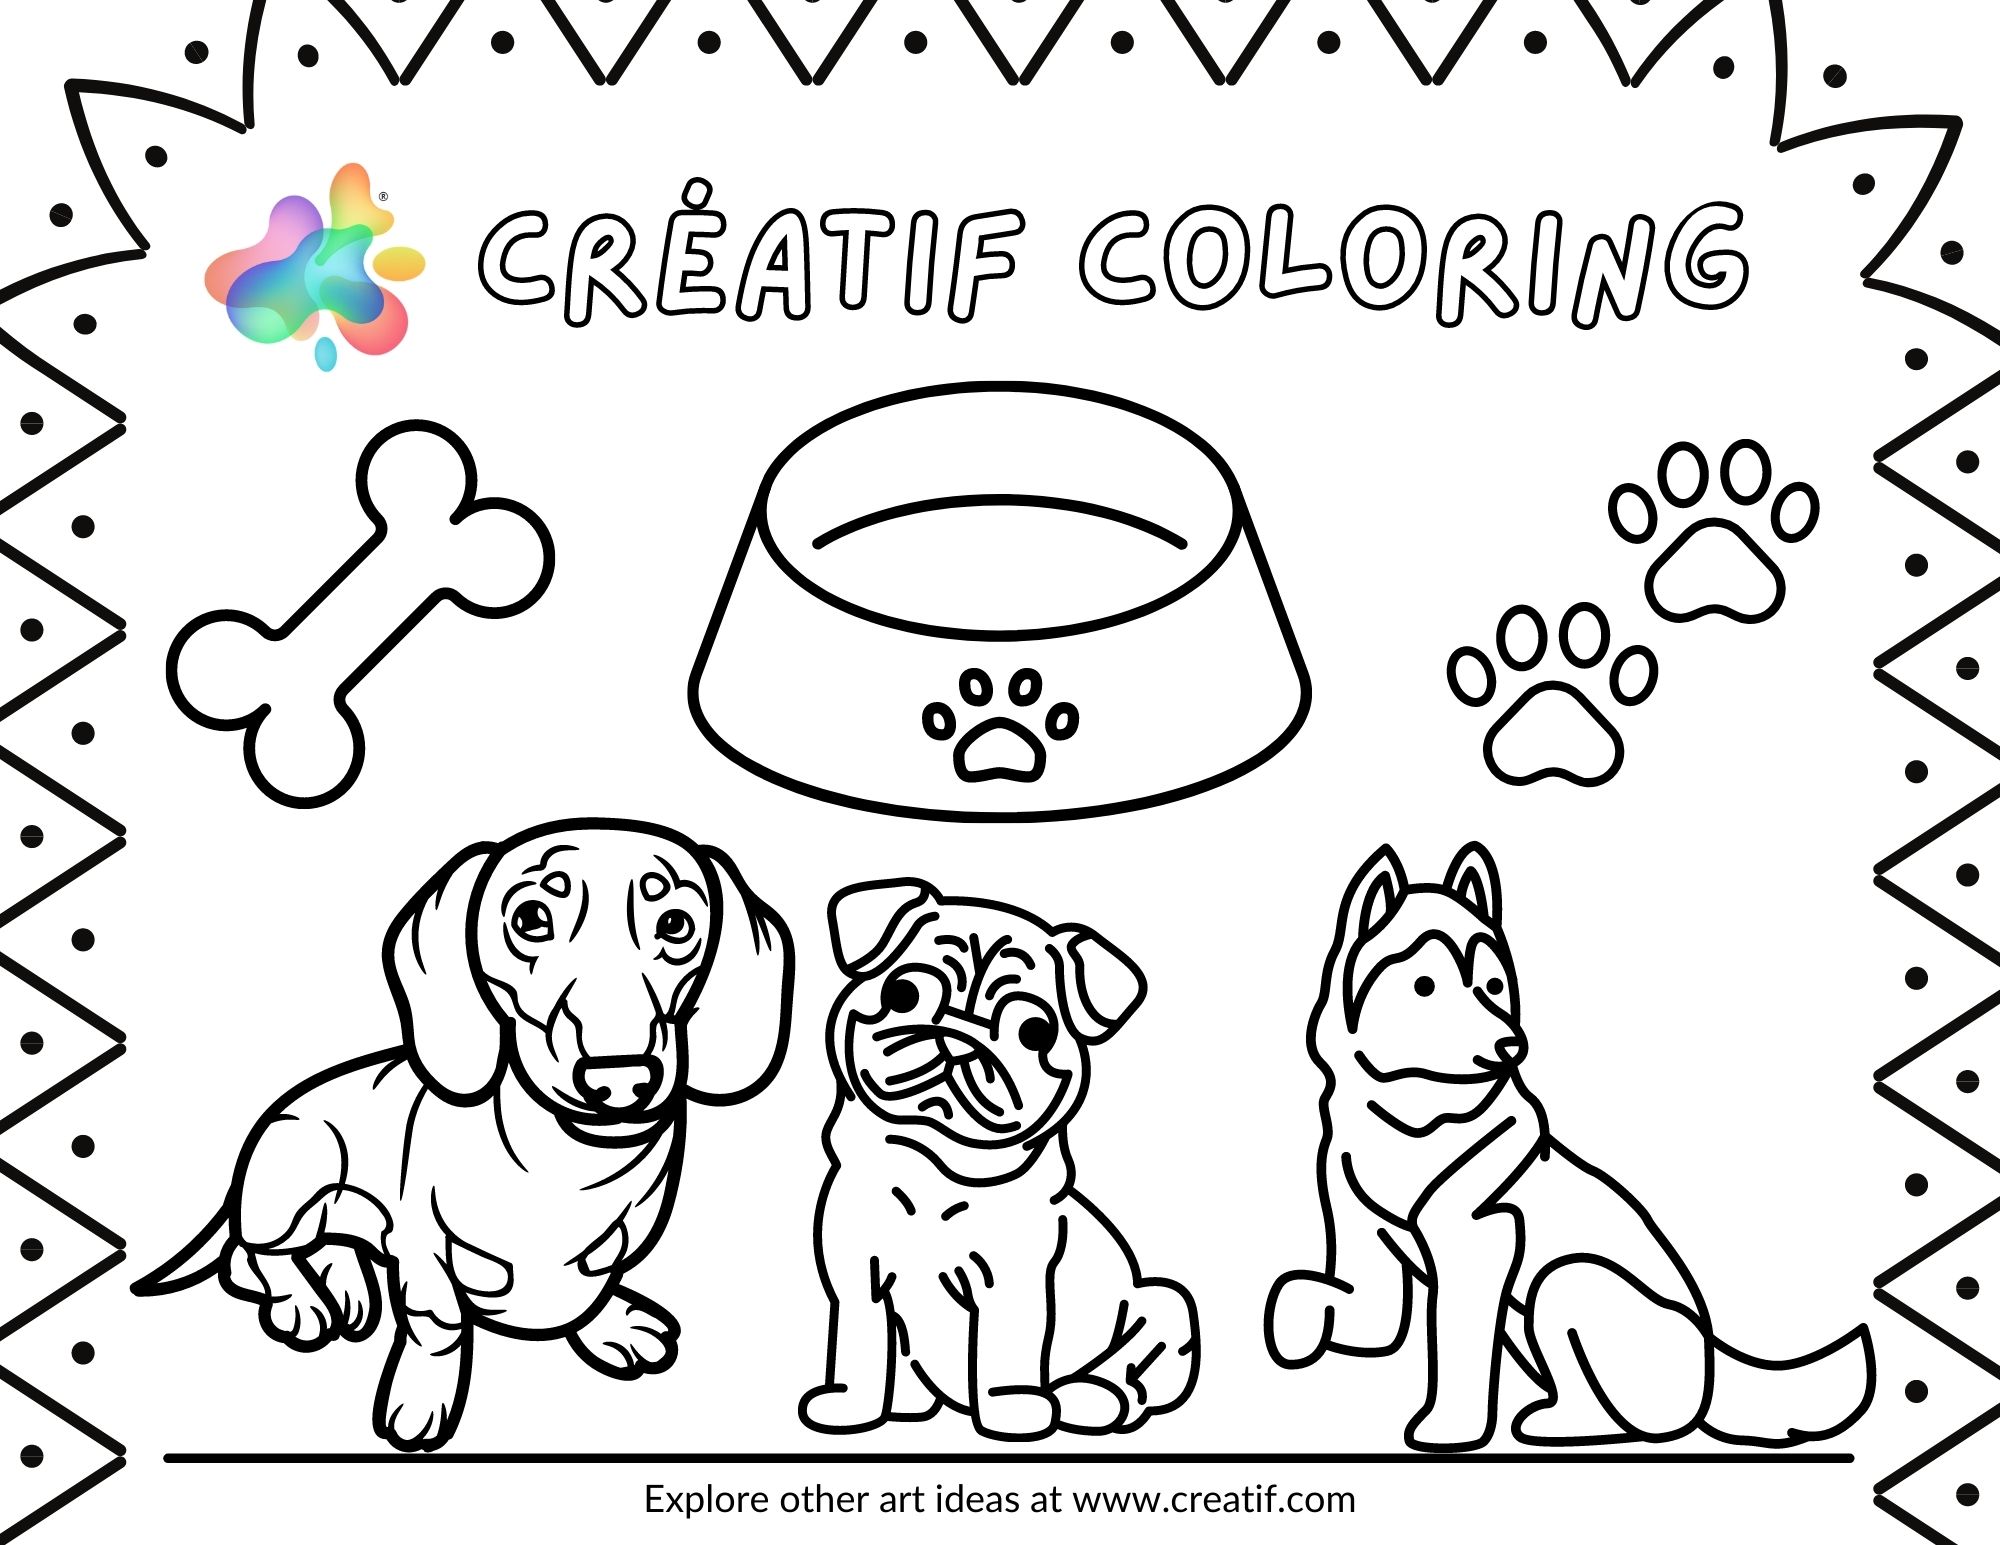 Coloring Art and Drawing Activities for Kids and Adults